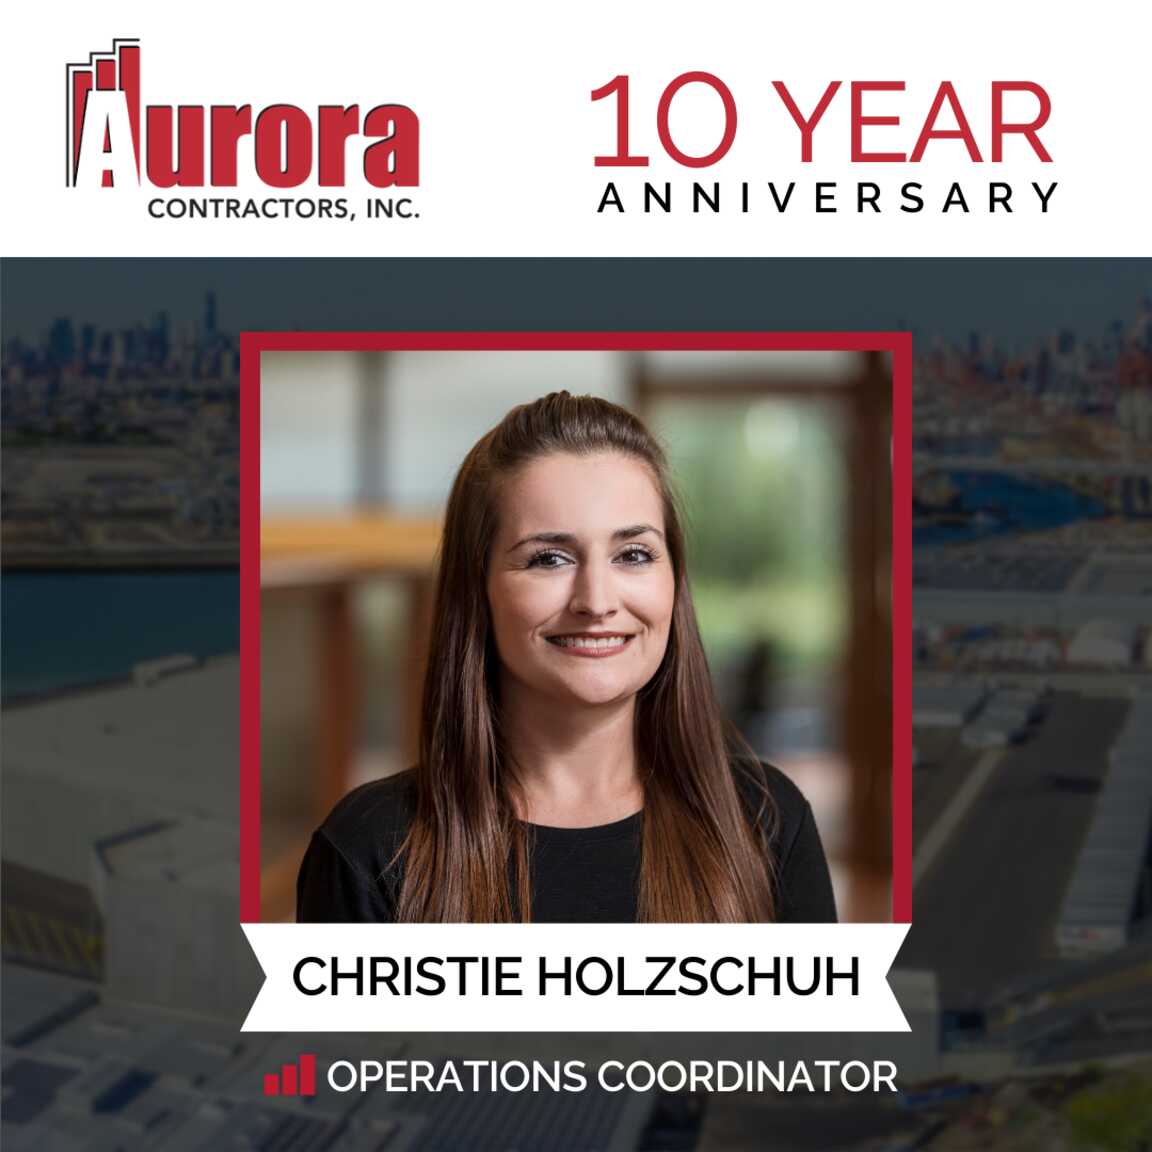 Christie Holzschuh Celebrating 10 Years with Aurora!